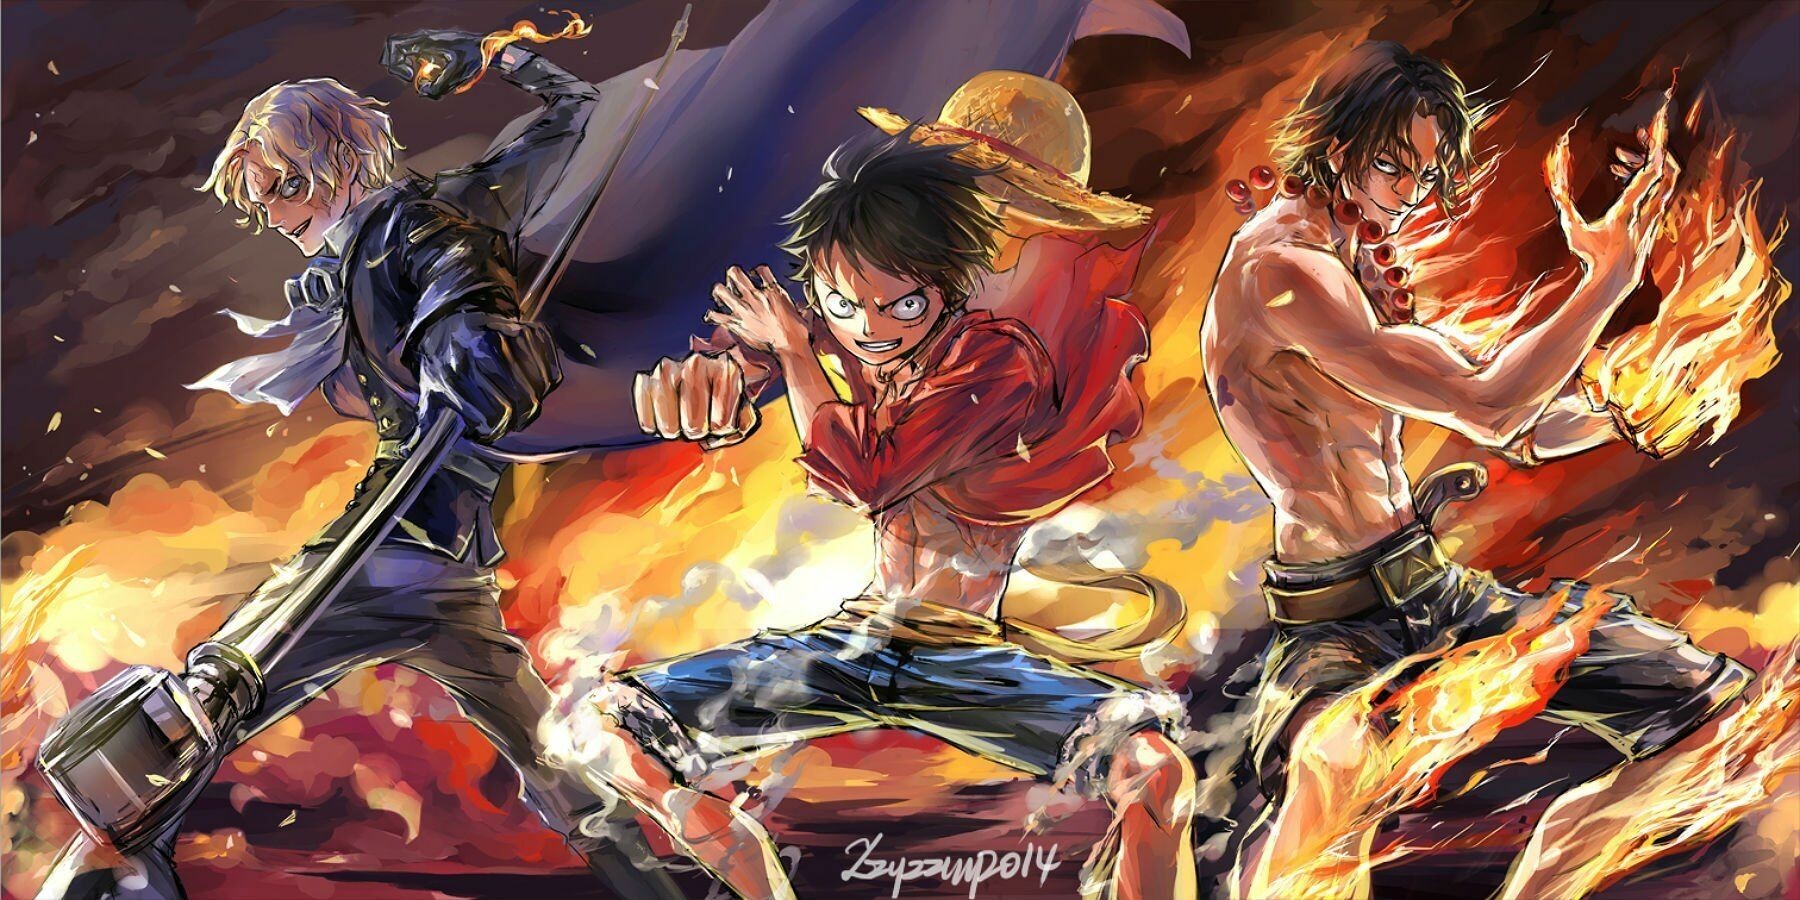 62+ One Piece Wallpapers: HD, 4K, 5K for PC and Mobile | Download free  images for iPhone, Android